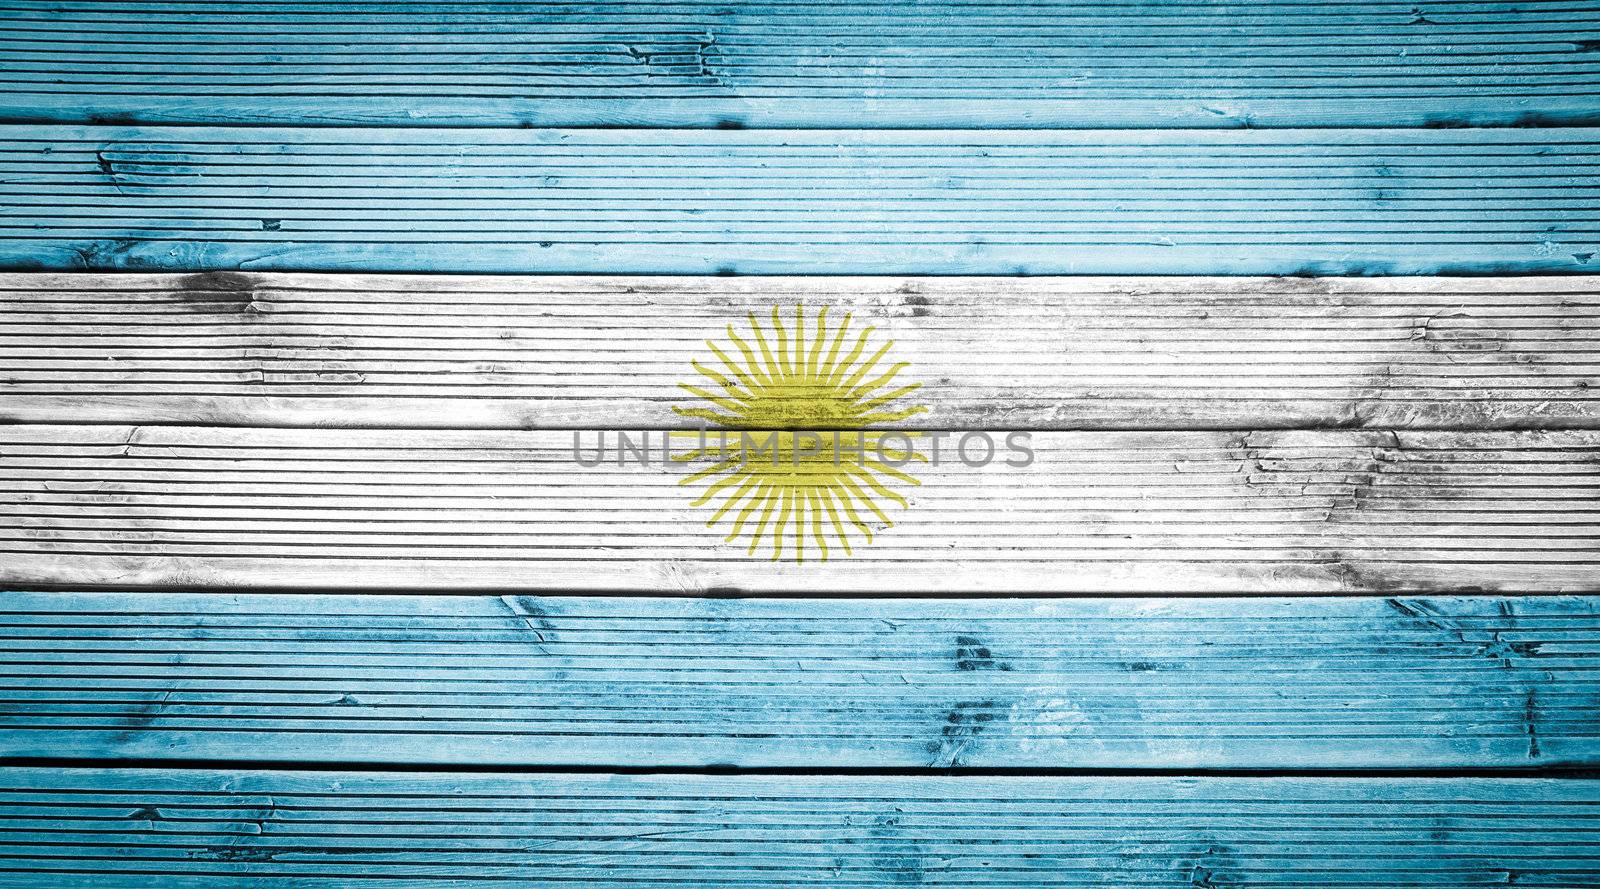 Wood texture background with colors of the flag of Argentina by doble.d